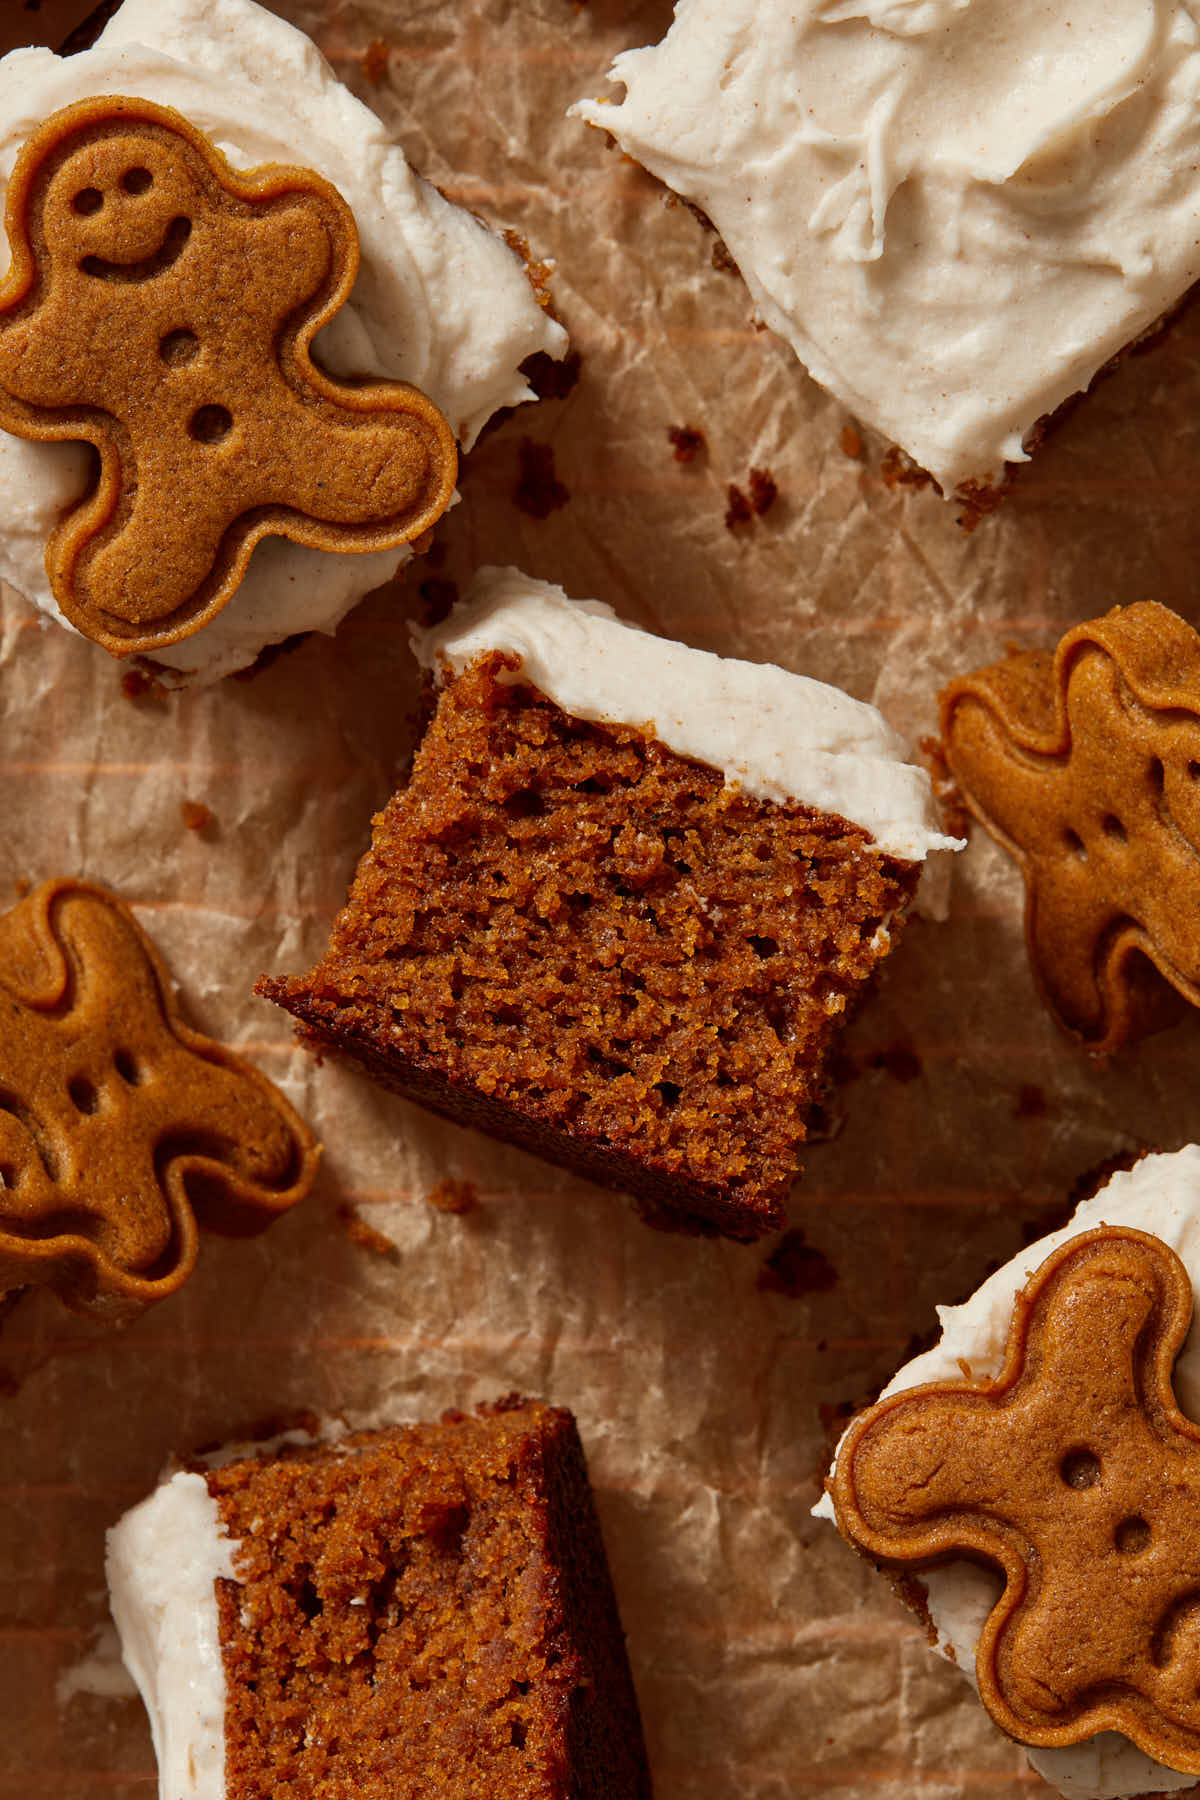 Pieces of cake turned on their sides with gingerbread men cookies scattered around.